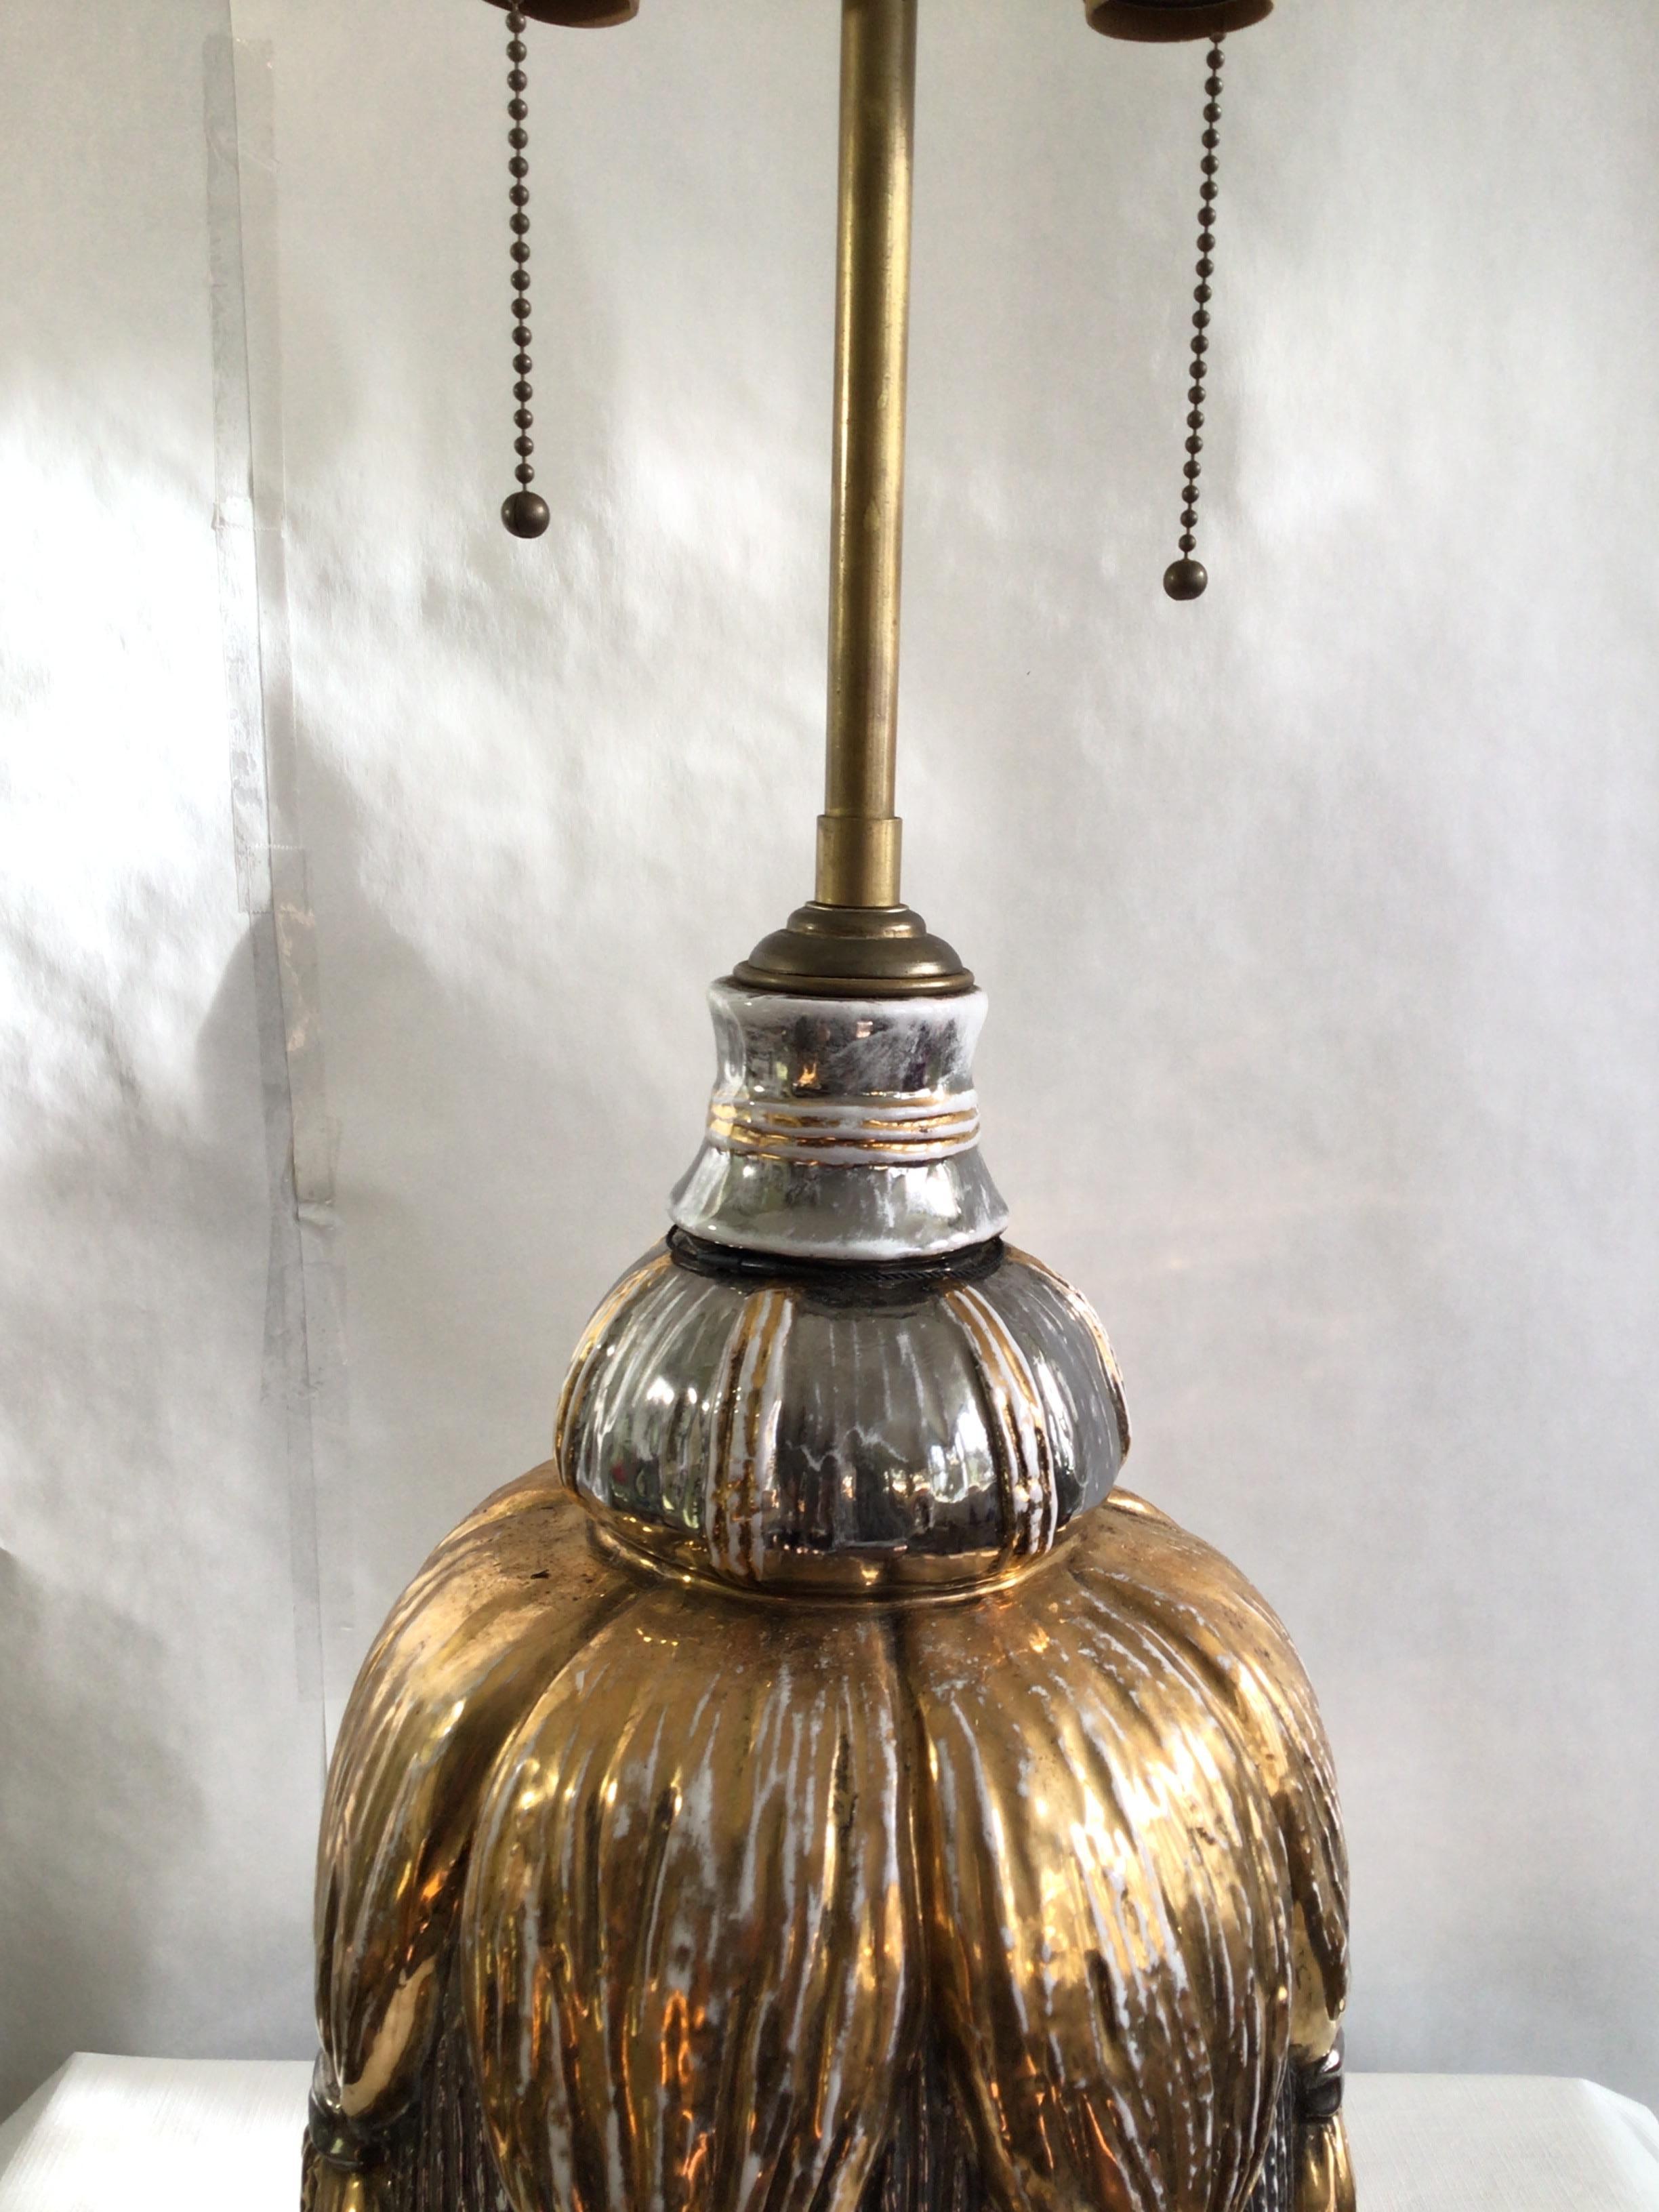 1950s Gold and Silver Painted Porcelain Tassel Table Lamp 
Needs rewiring
Height to top of washer underneath finial
Hairline cracks in glazing on underside
Minor paint loss consistent with age.